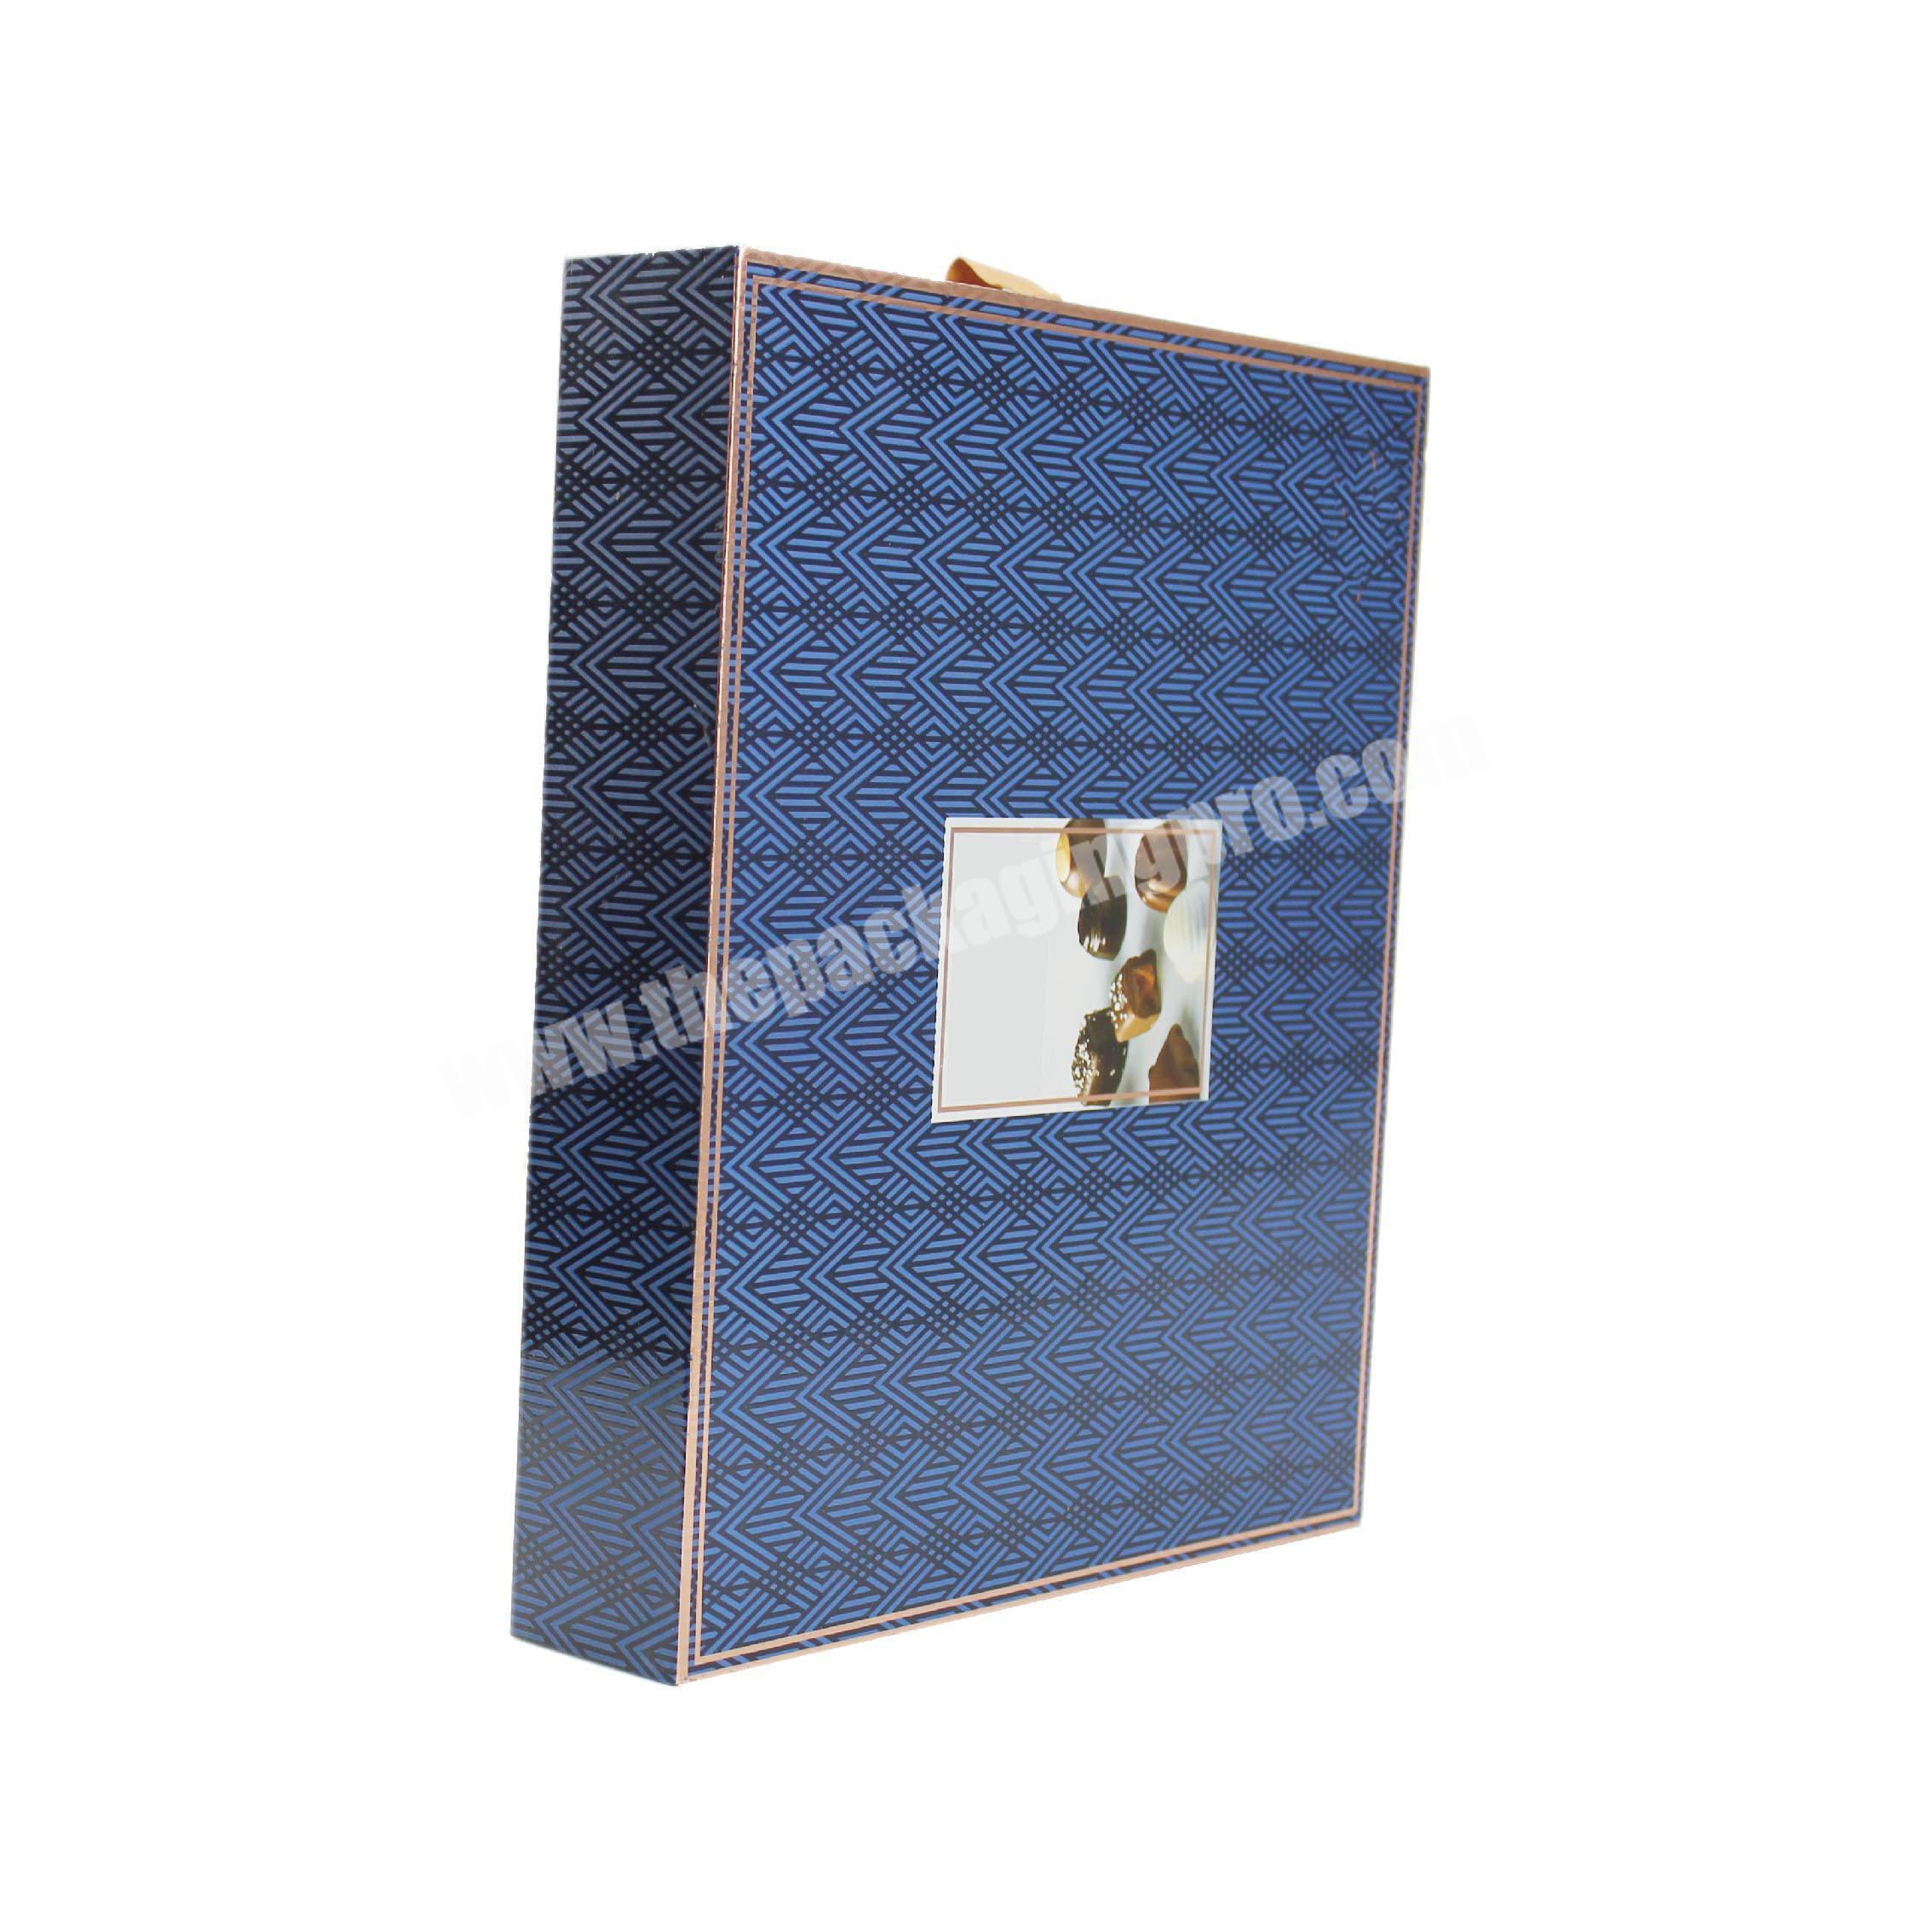 Popular high quality surprise book shape gift box